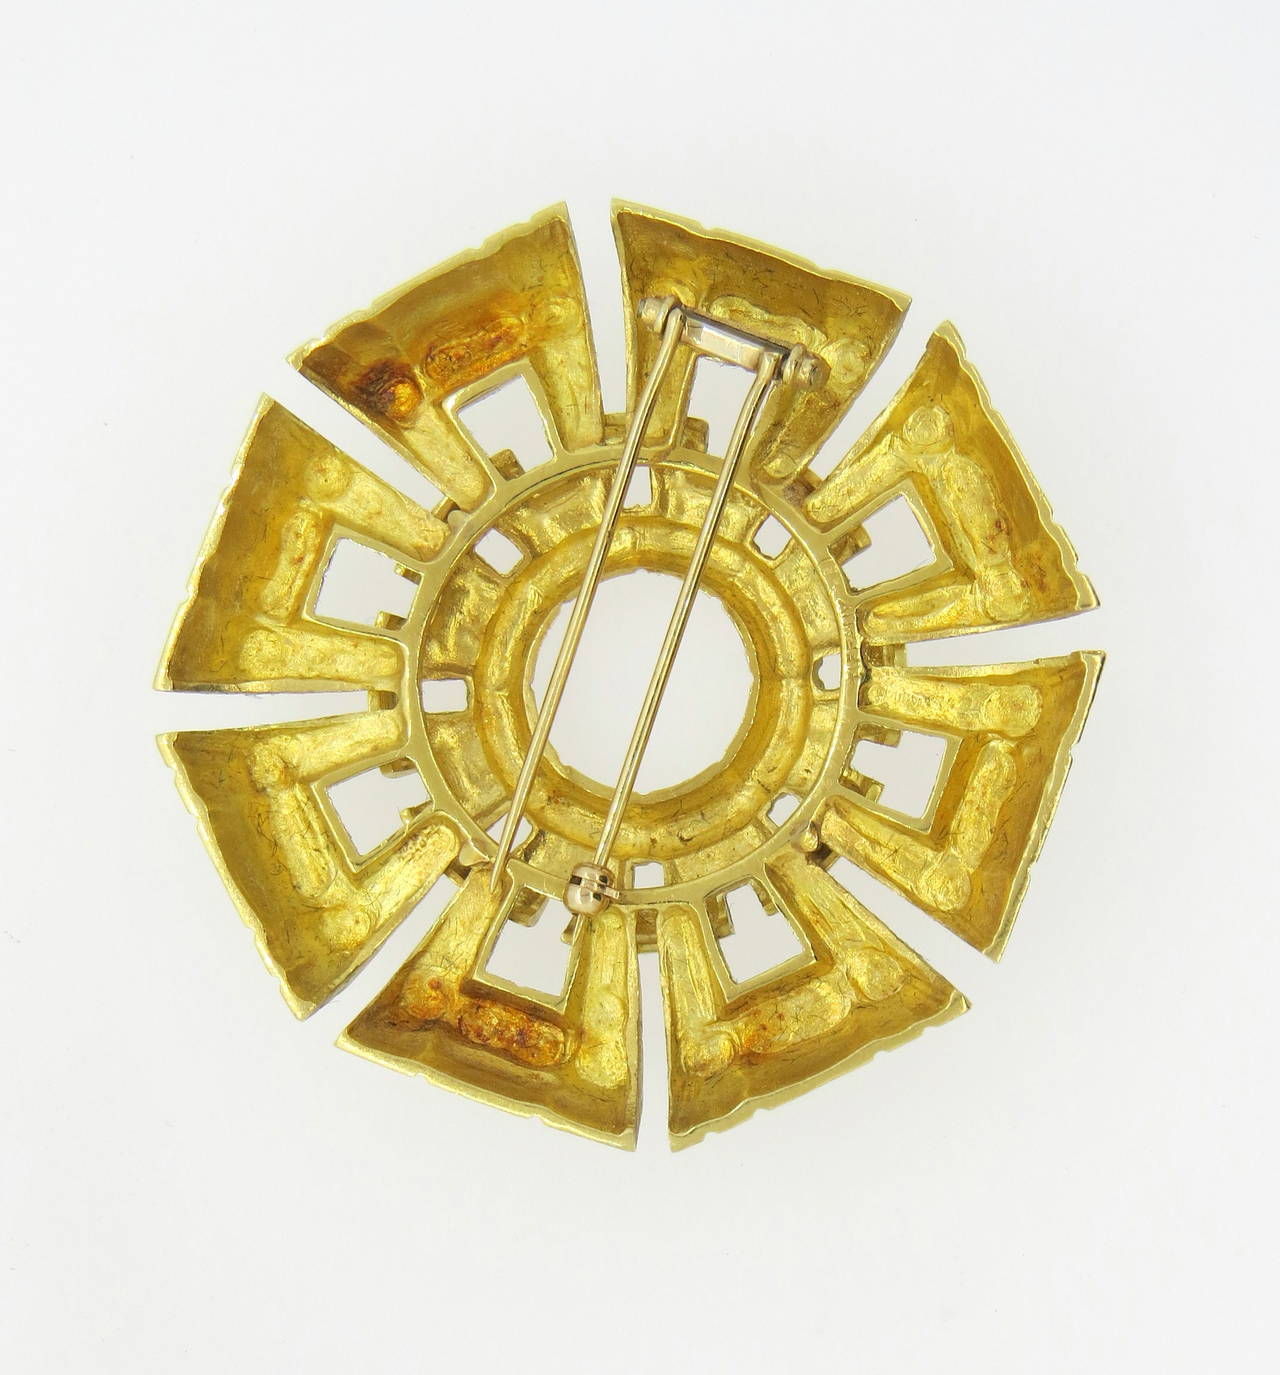 18k gold large brooch, crafted by Tiffany & Co. Measuring 55mm in diameter. Marked Tiffany & Co and 18k. Weight of the piece - 53 grams